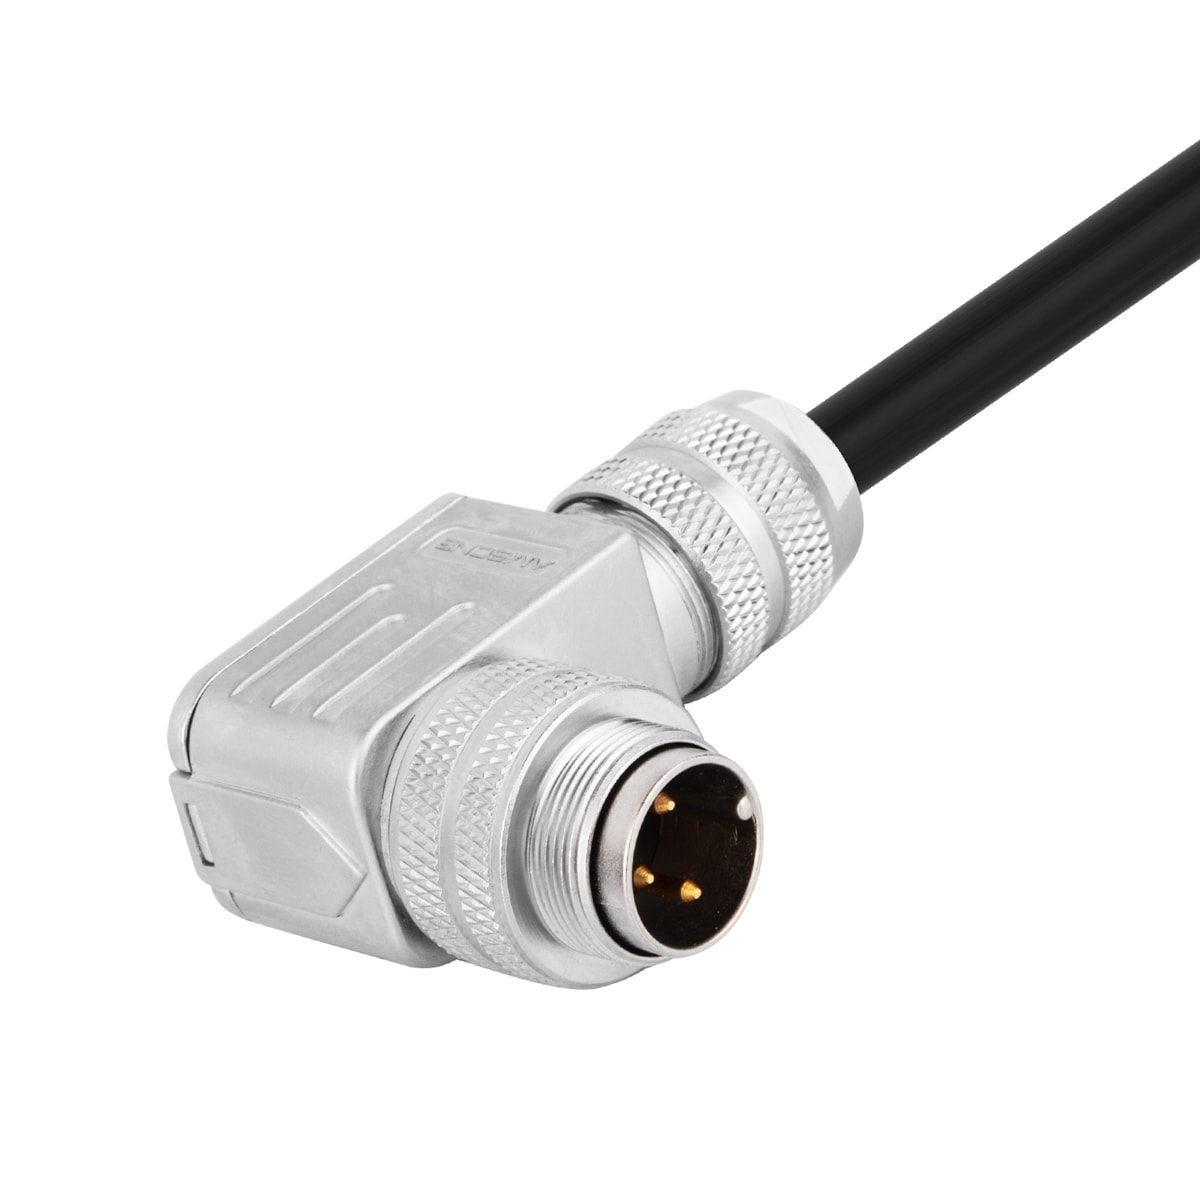 M16 cable connector, male, contacts:7, field assembly type, solder connection, right angled, IP67, UL certified